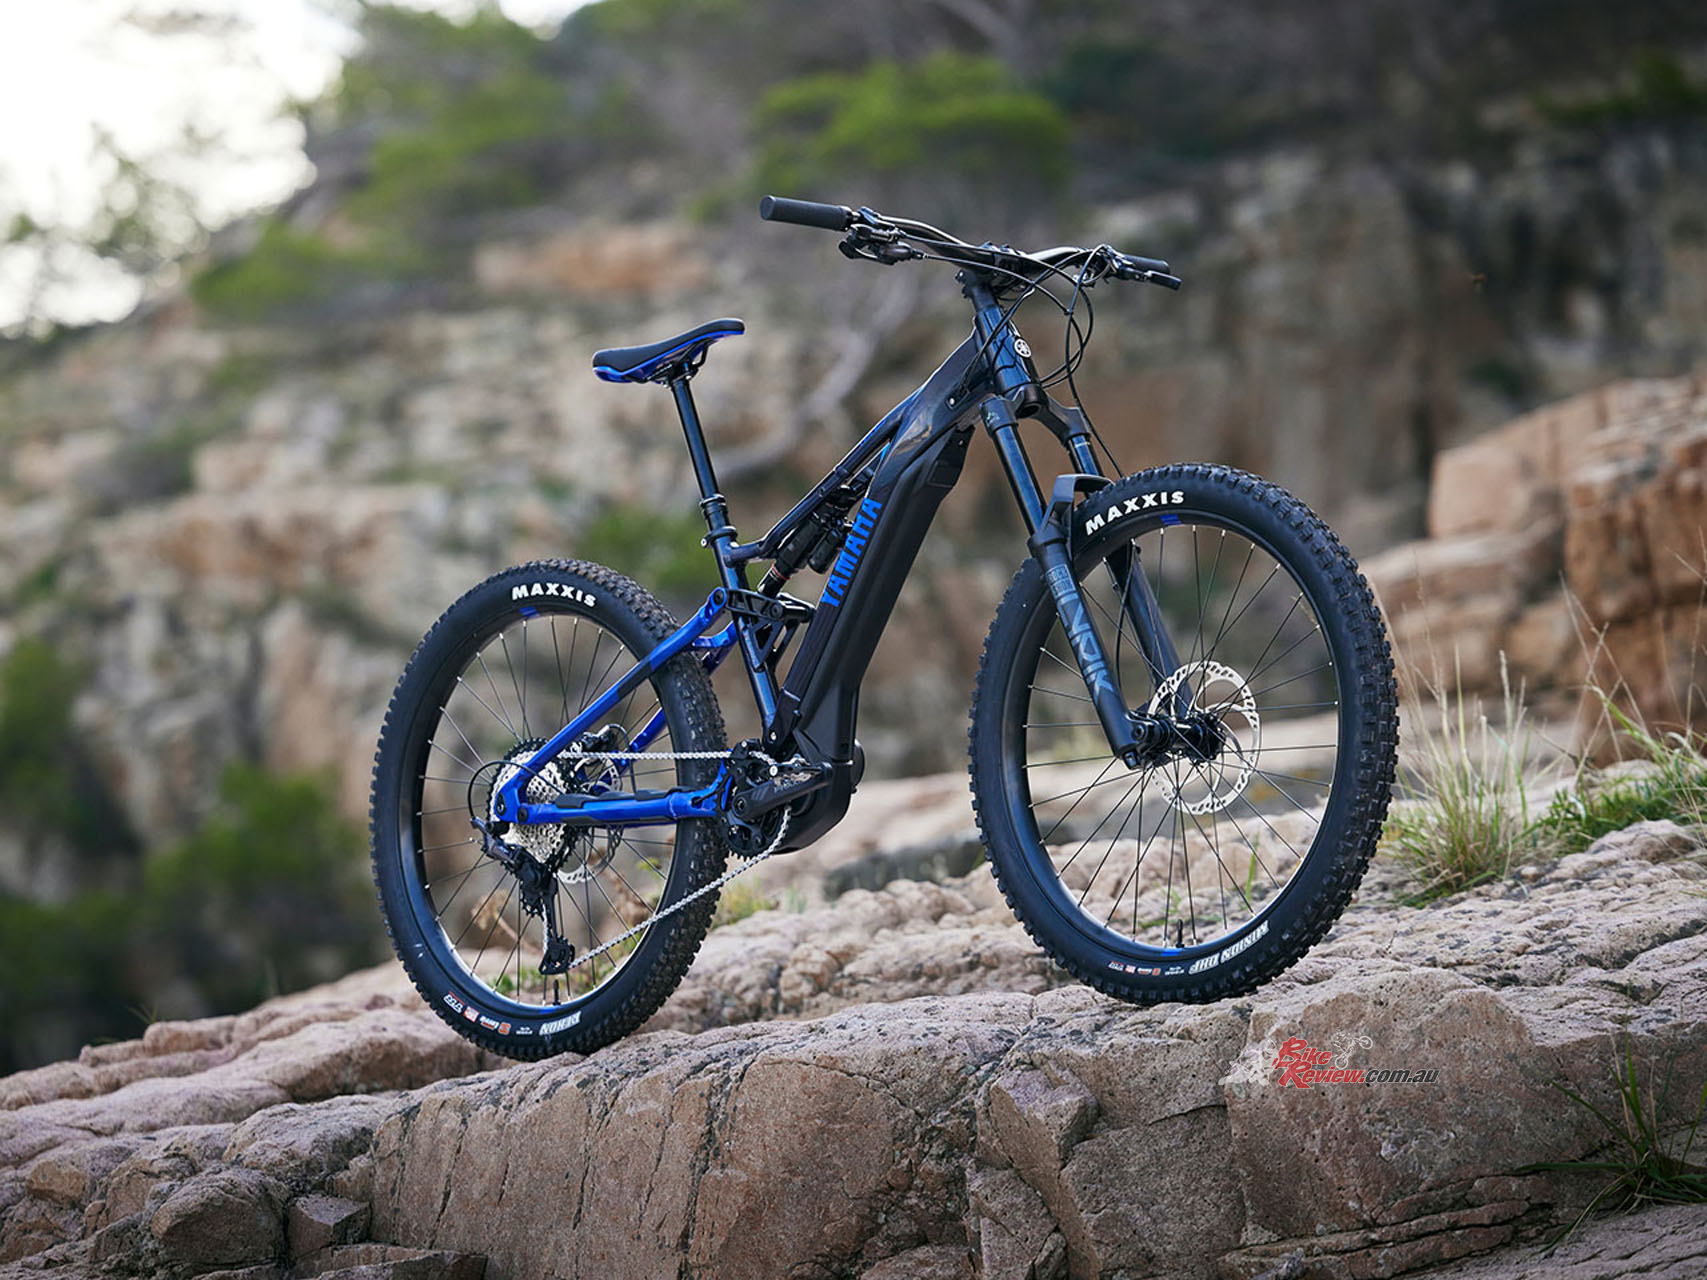 Yamaha is still the only e-Bike manufacturer that offers its own motor and frame package. Check out the all-new Yamaha YDX-Moro 07 e-MTB out below...